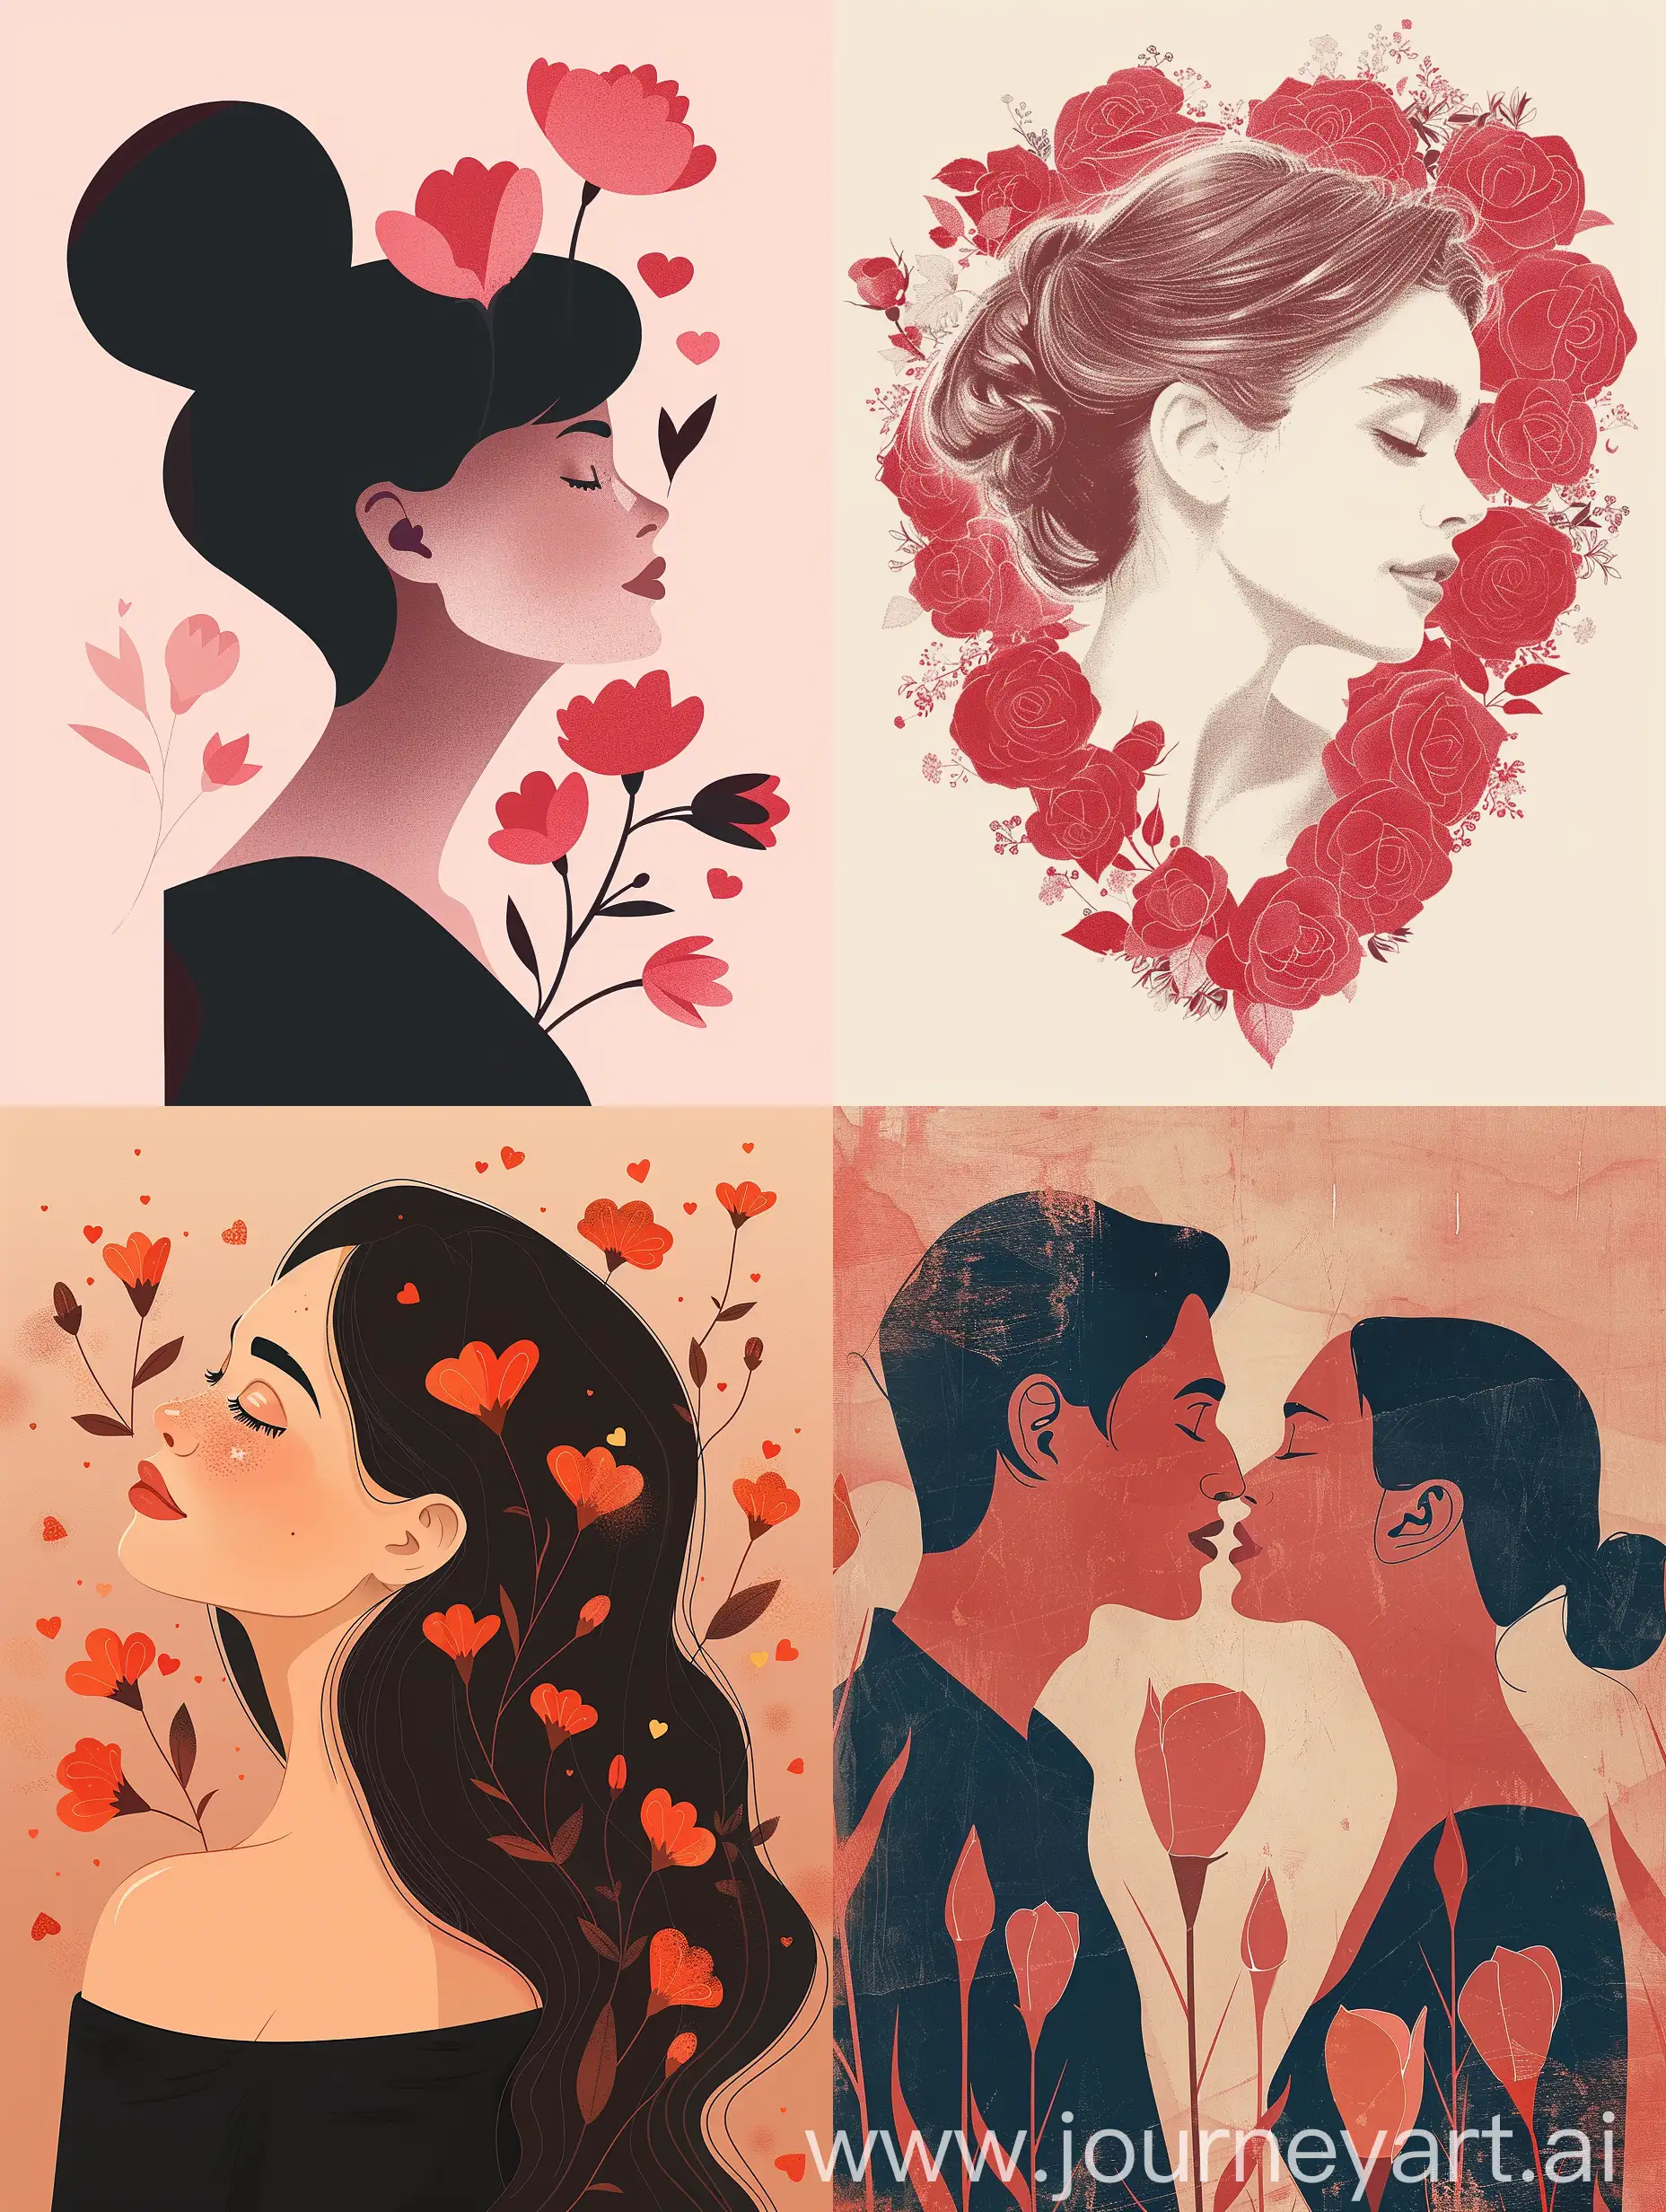 Design a real romantic image to celebrate International Women's Day